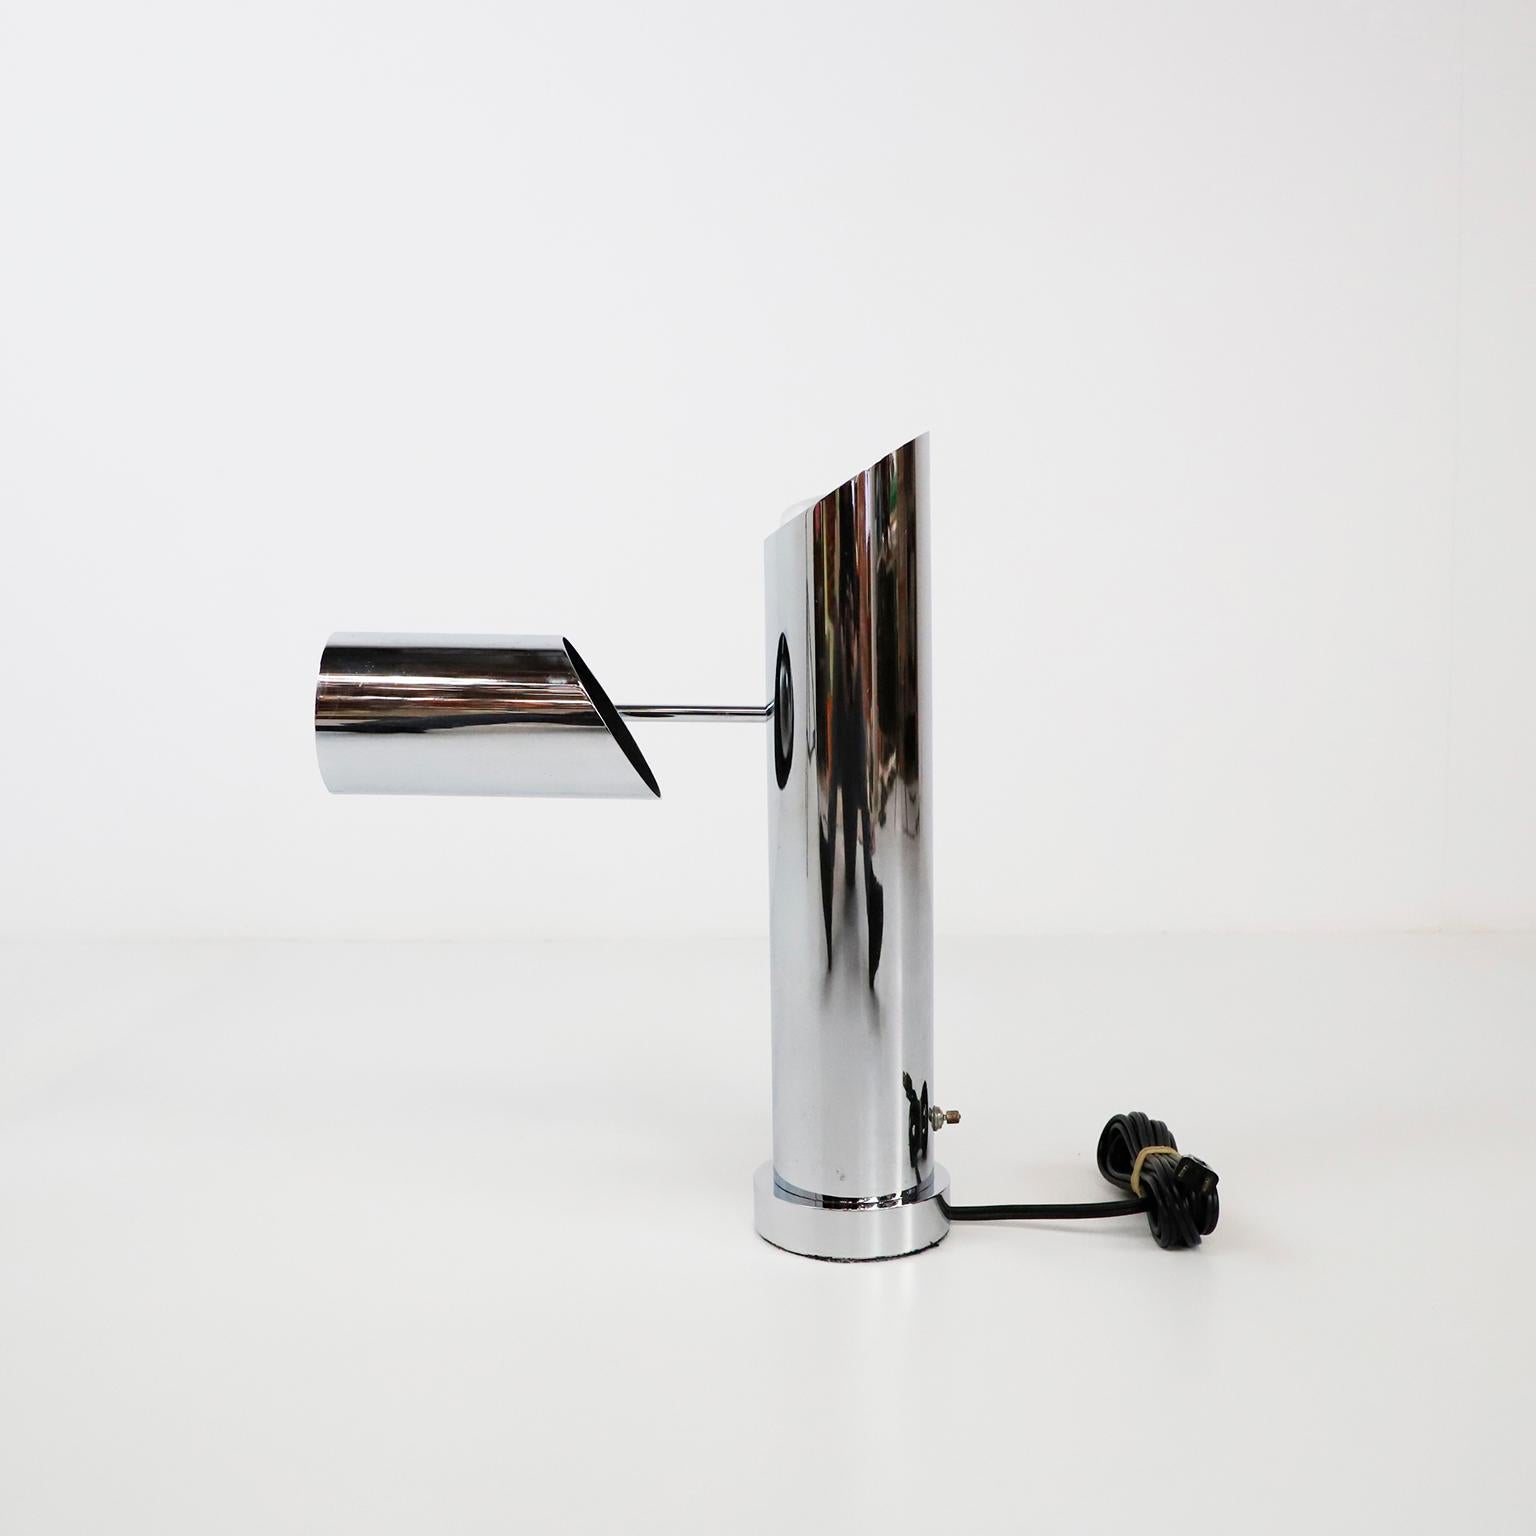 An interesting chrome-plated table lamp, designed by Angelo Lelli for Lightolier, circa 1960s. The cylindrical body of the lamp is bisected diagonally, with a light source in the bottom section directed upwards and a light source in the top section